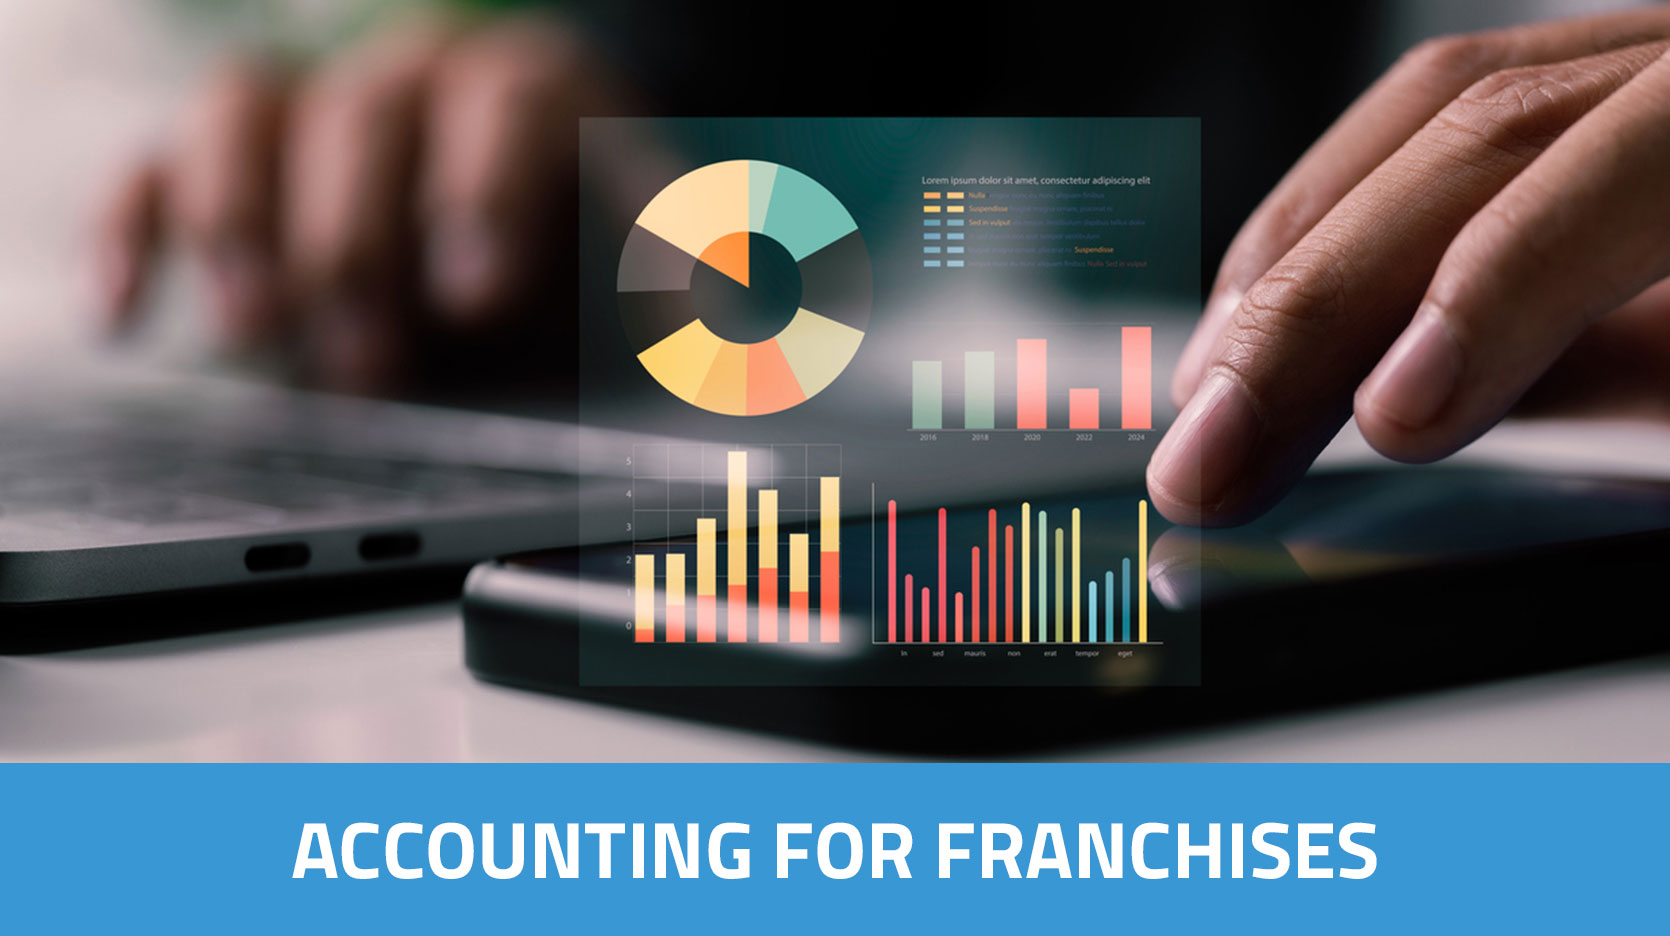 ACCOUNTING FOR FRANCHISES